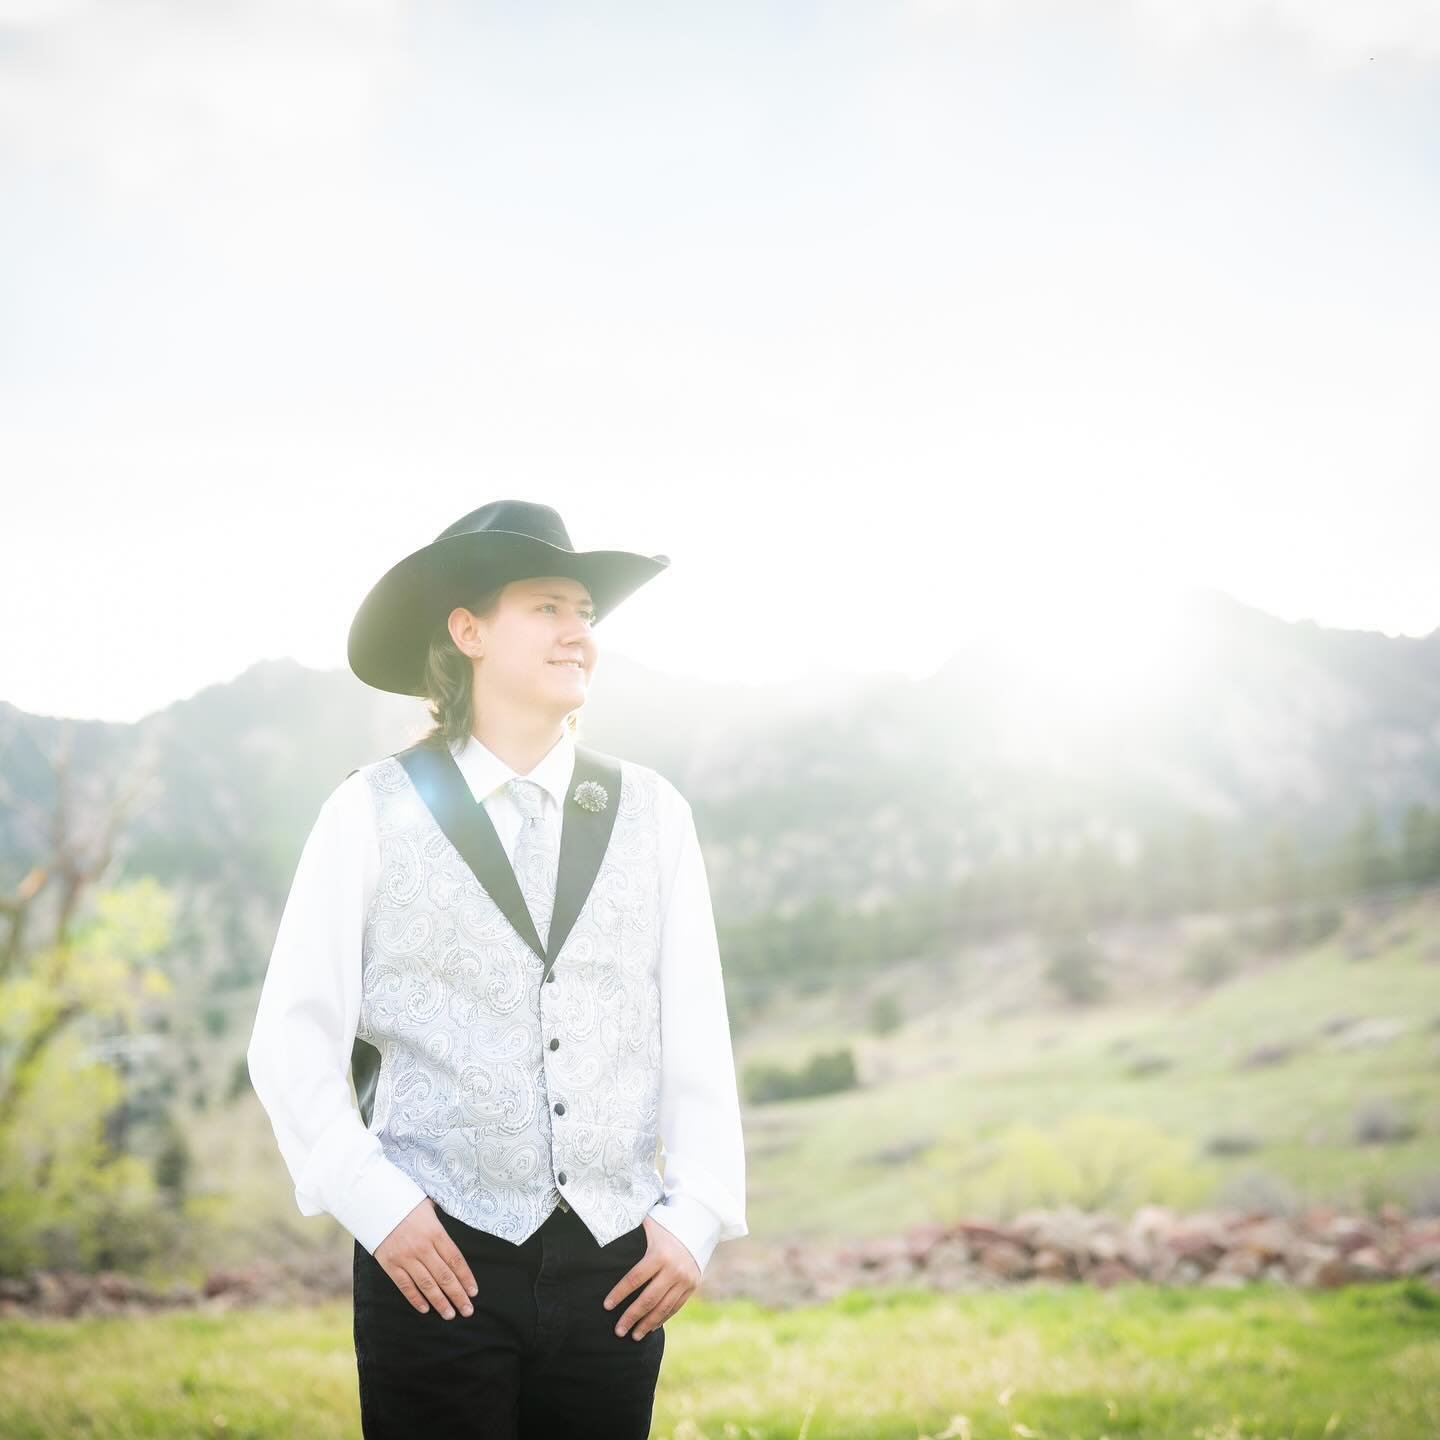 Hanging out with Skyler to do his end of year senior pictures was so much fun! Skyler is such a sweet guy, a believer, AND a bull rider which is SO cool! What I love most about senior photos is meeting all these great young folks with all their own p